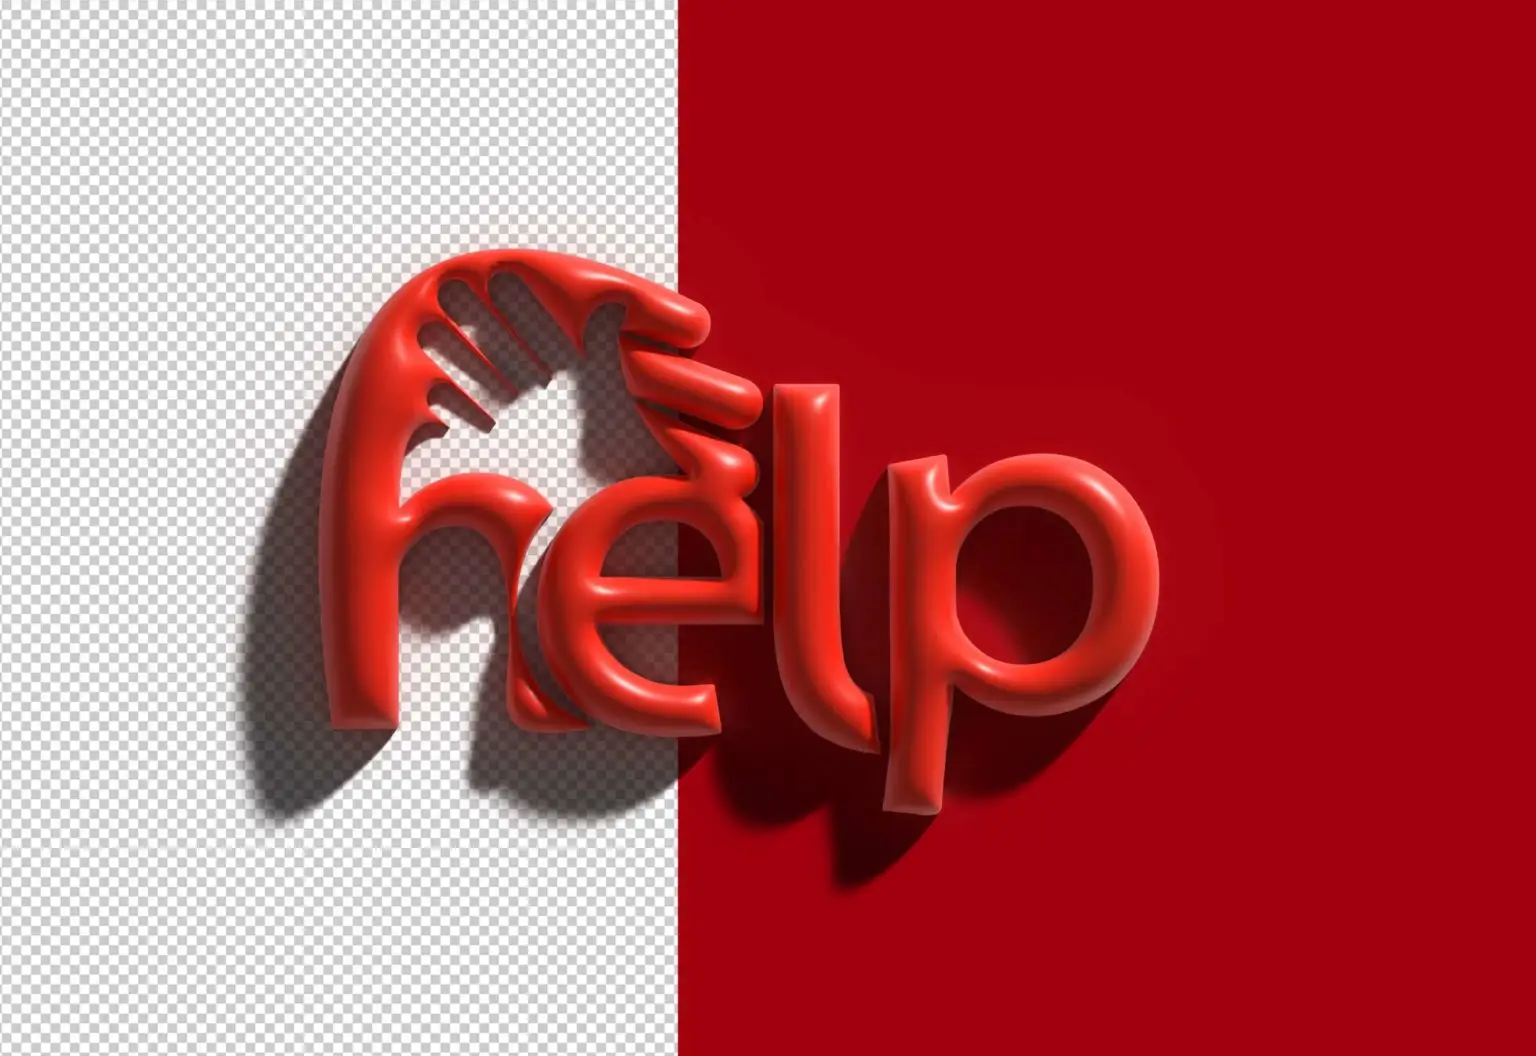 A white and red background with help written on it